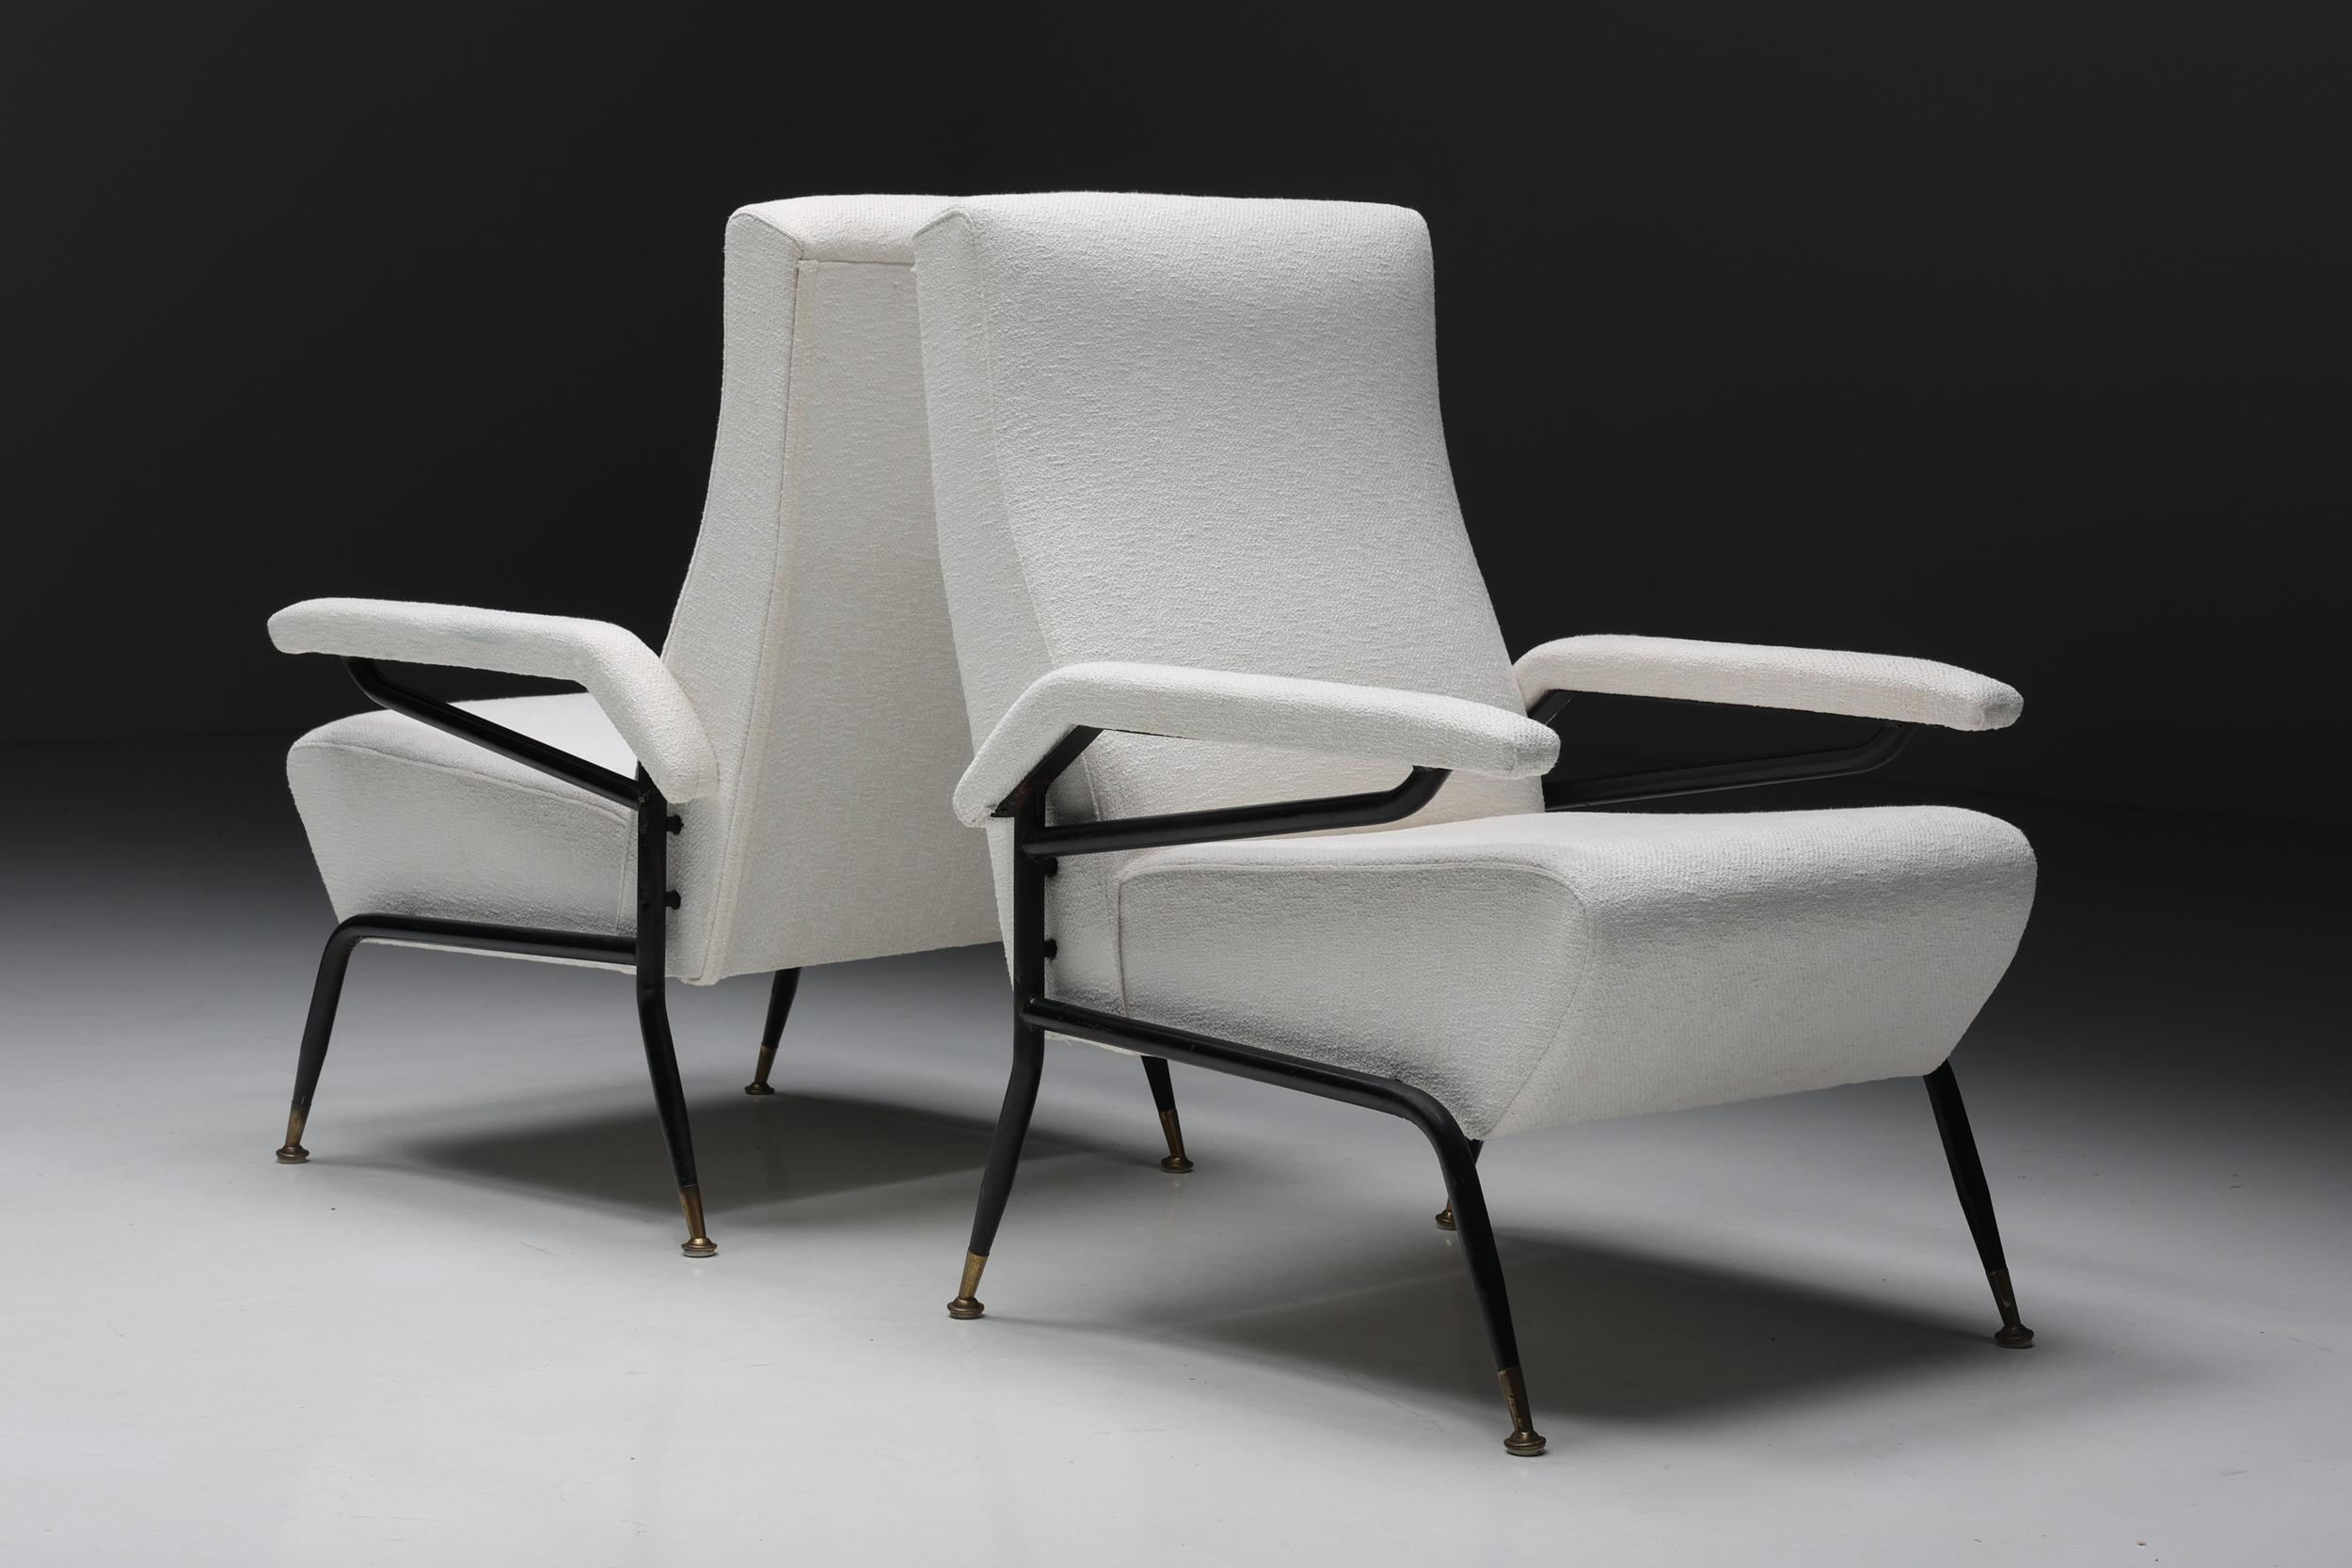 Italian Wim Rietveld Inspired Armchairs in Off-White Upholstery, Italy, 1970s For Sale